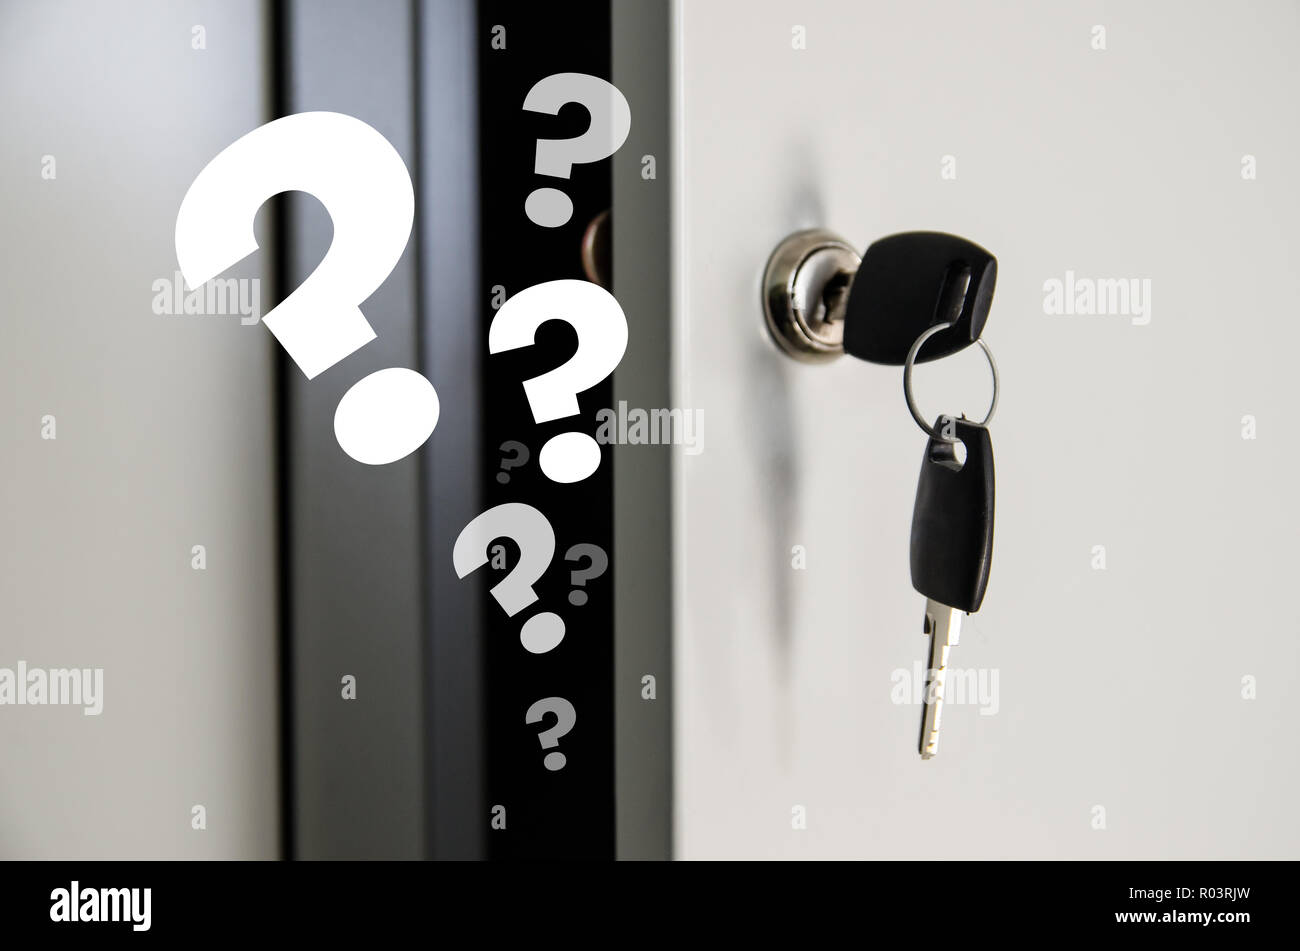 keys in the door of an open private locker where question marks fly out Stock Photo